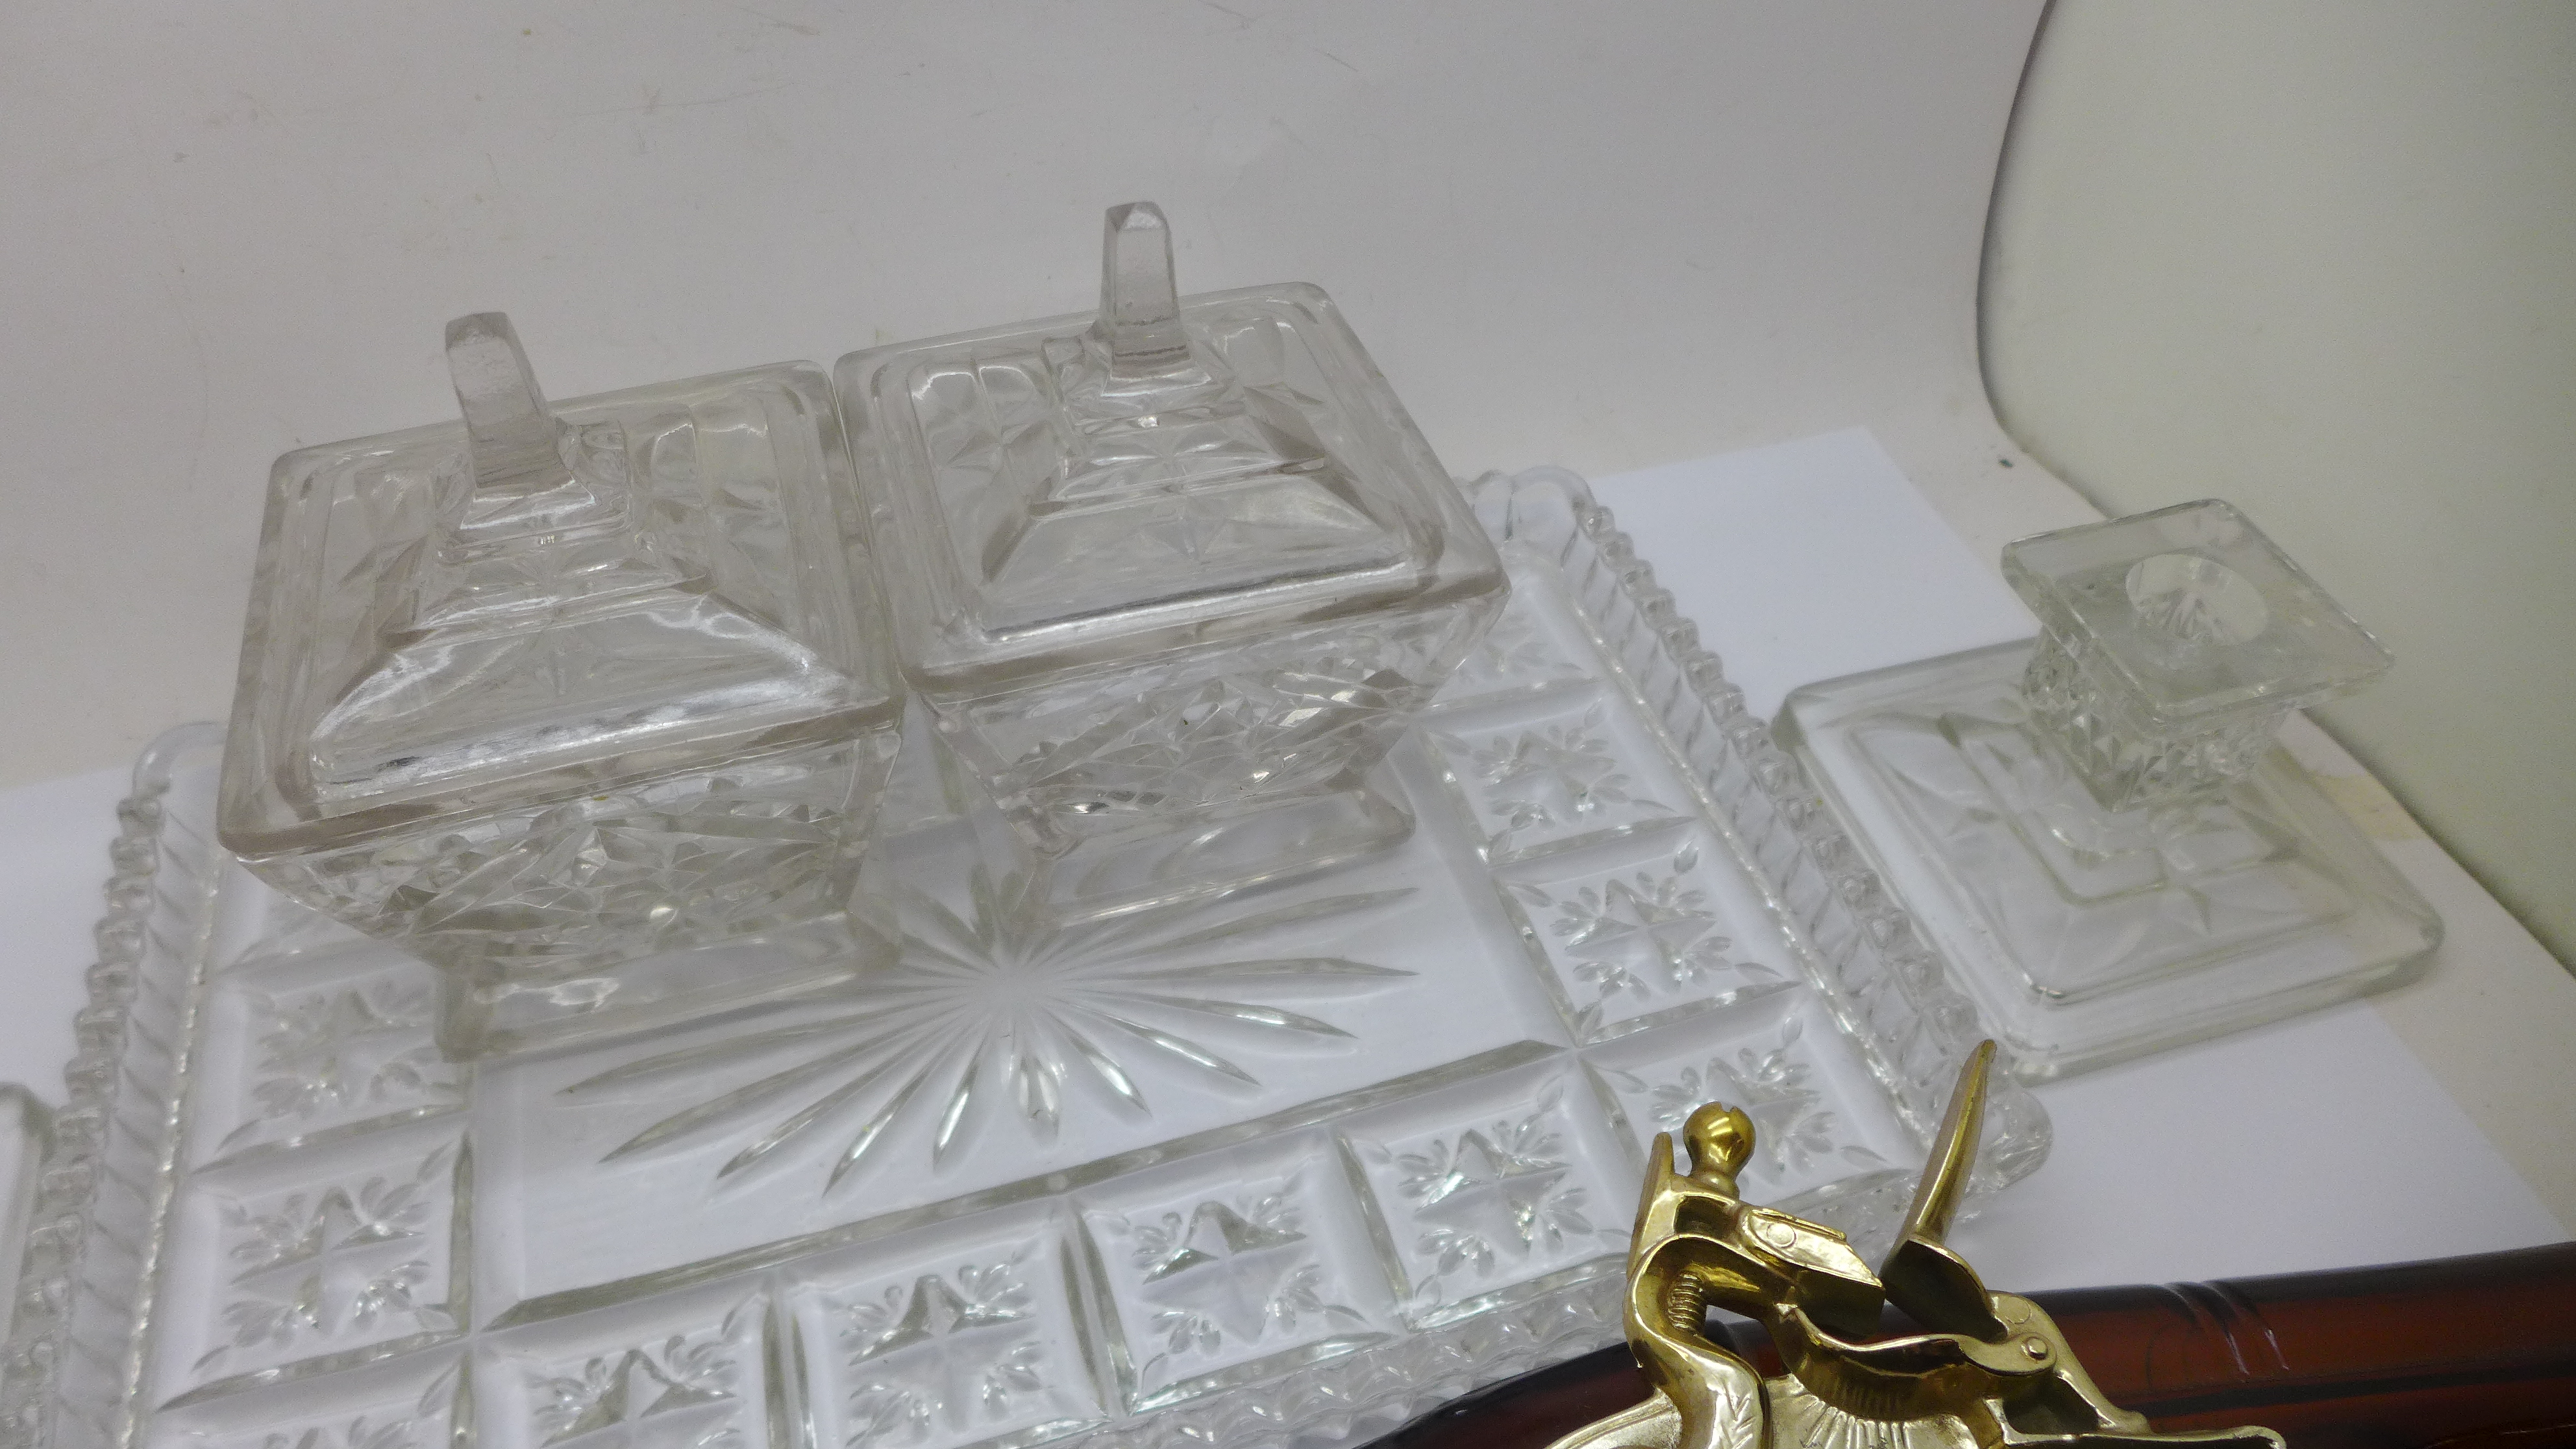 Two Avon novelty perfume bottles in the form of a car and a pistol, and a glass tray set - Image 5 of 5